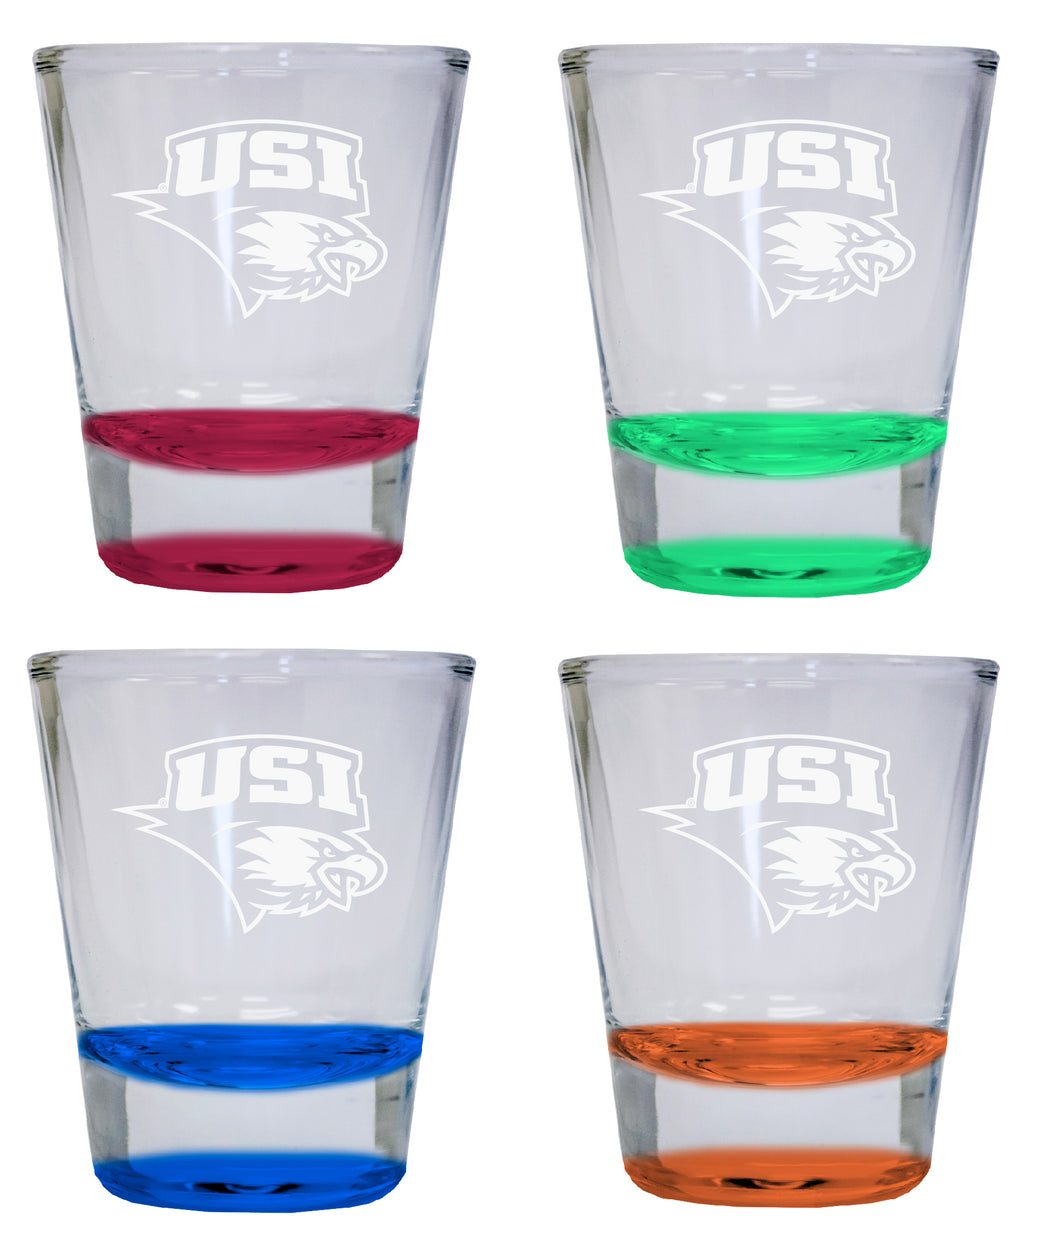 NCAA University of Southern Indiana Collector's 2oz Laser-Engraved Spirit Shot Glass Red, Orange, Blue and Green 4-Pack